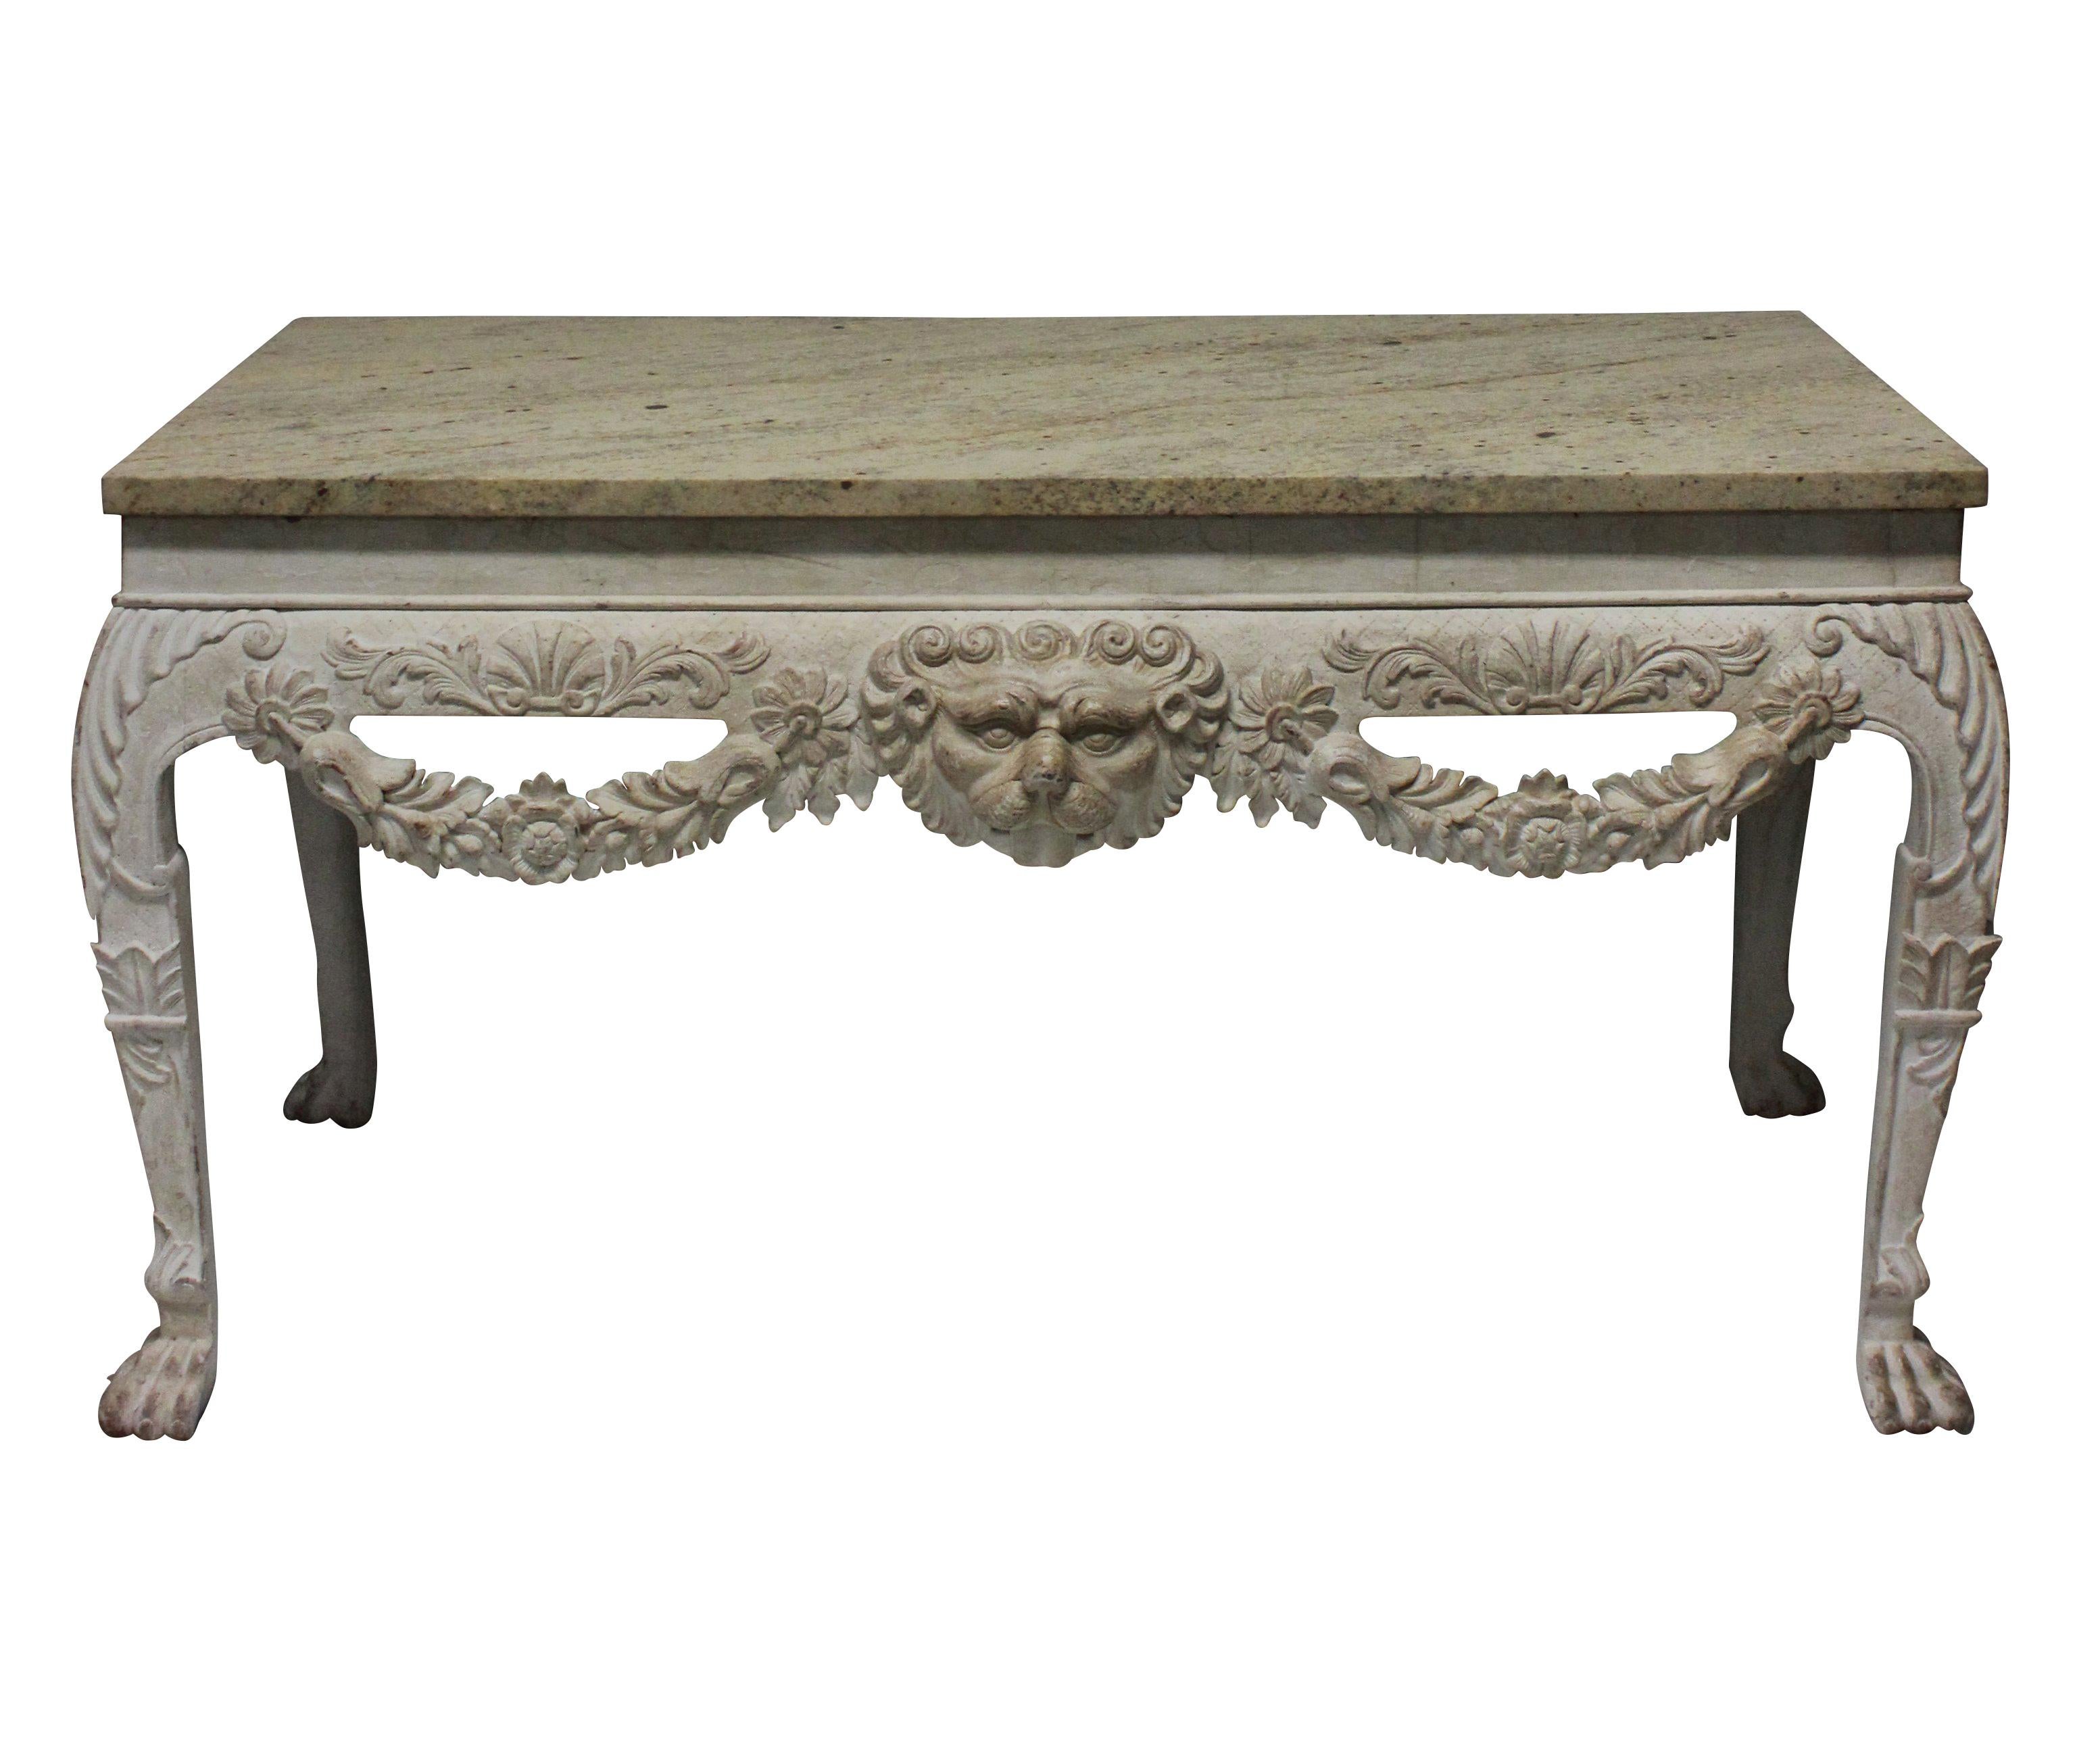 English Pair of Large 18th Century Style Painted Marble Top Consoles